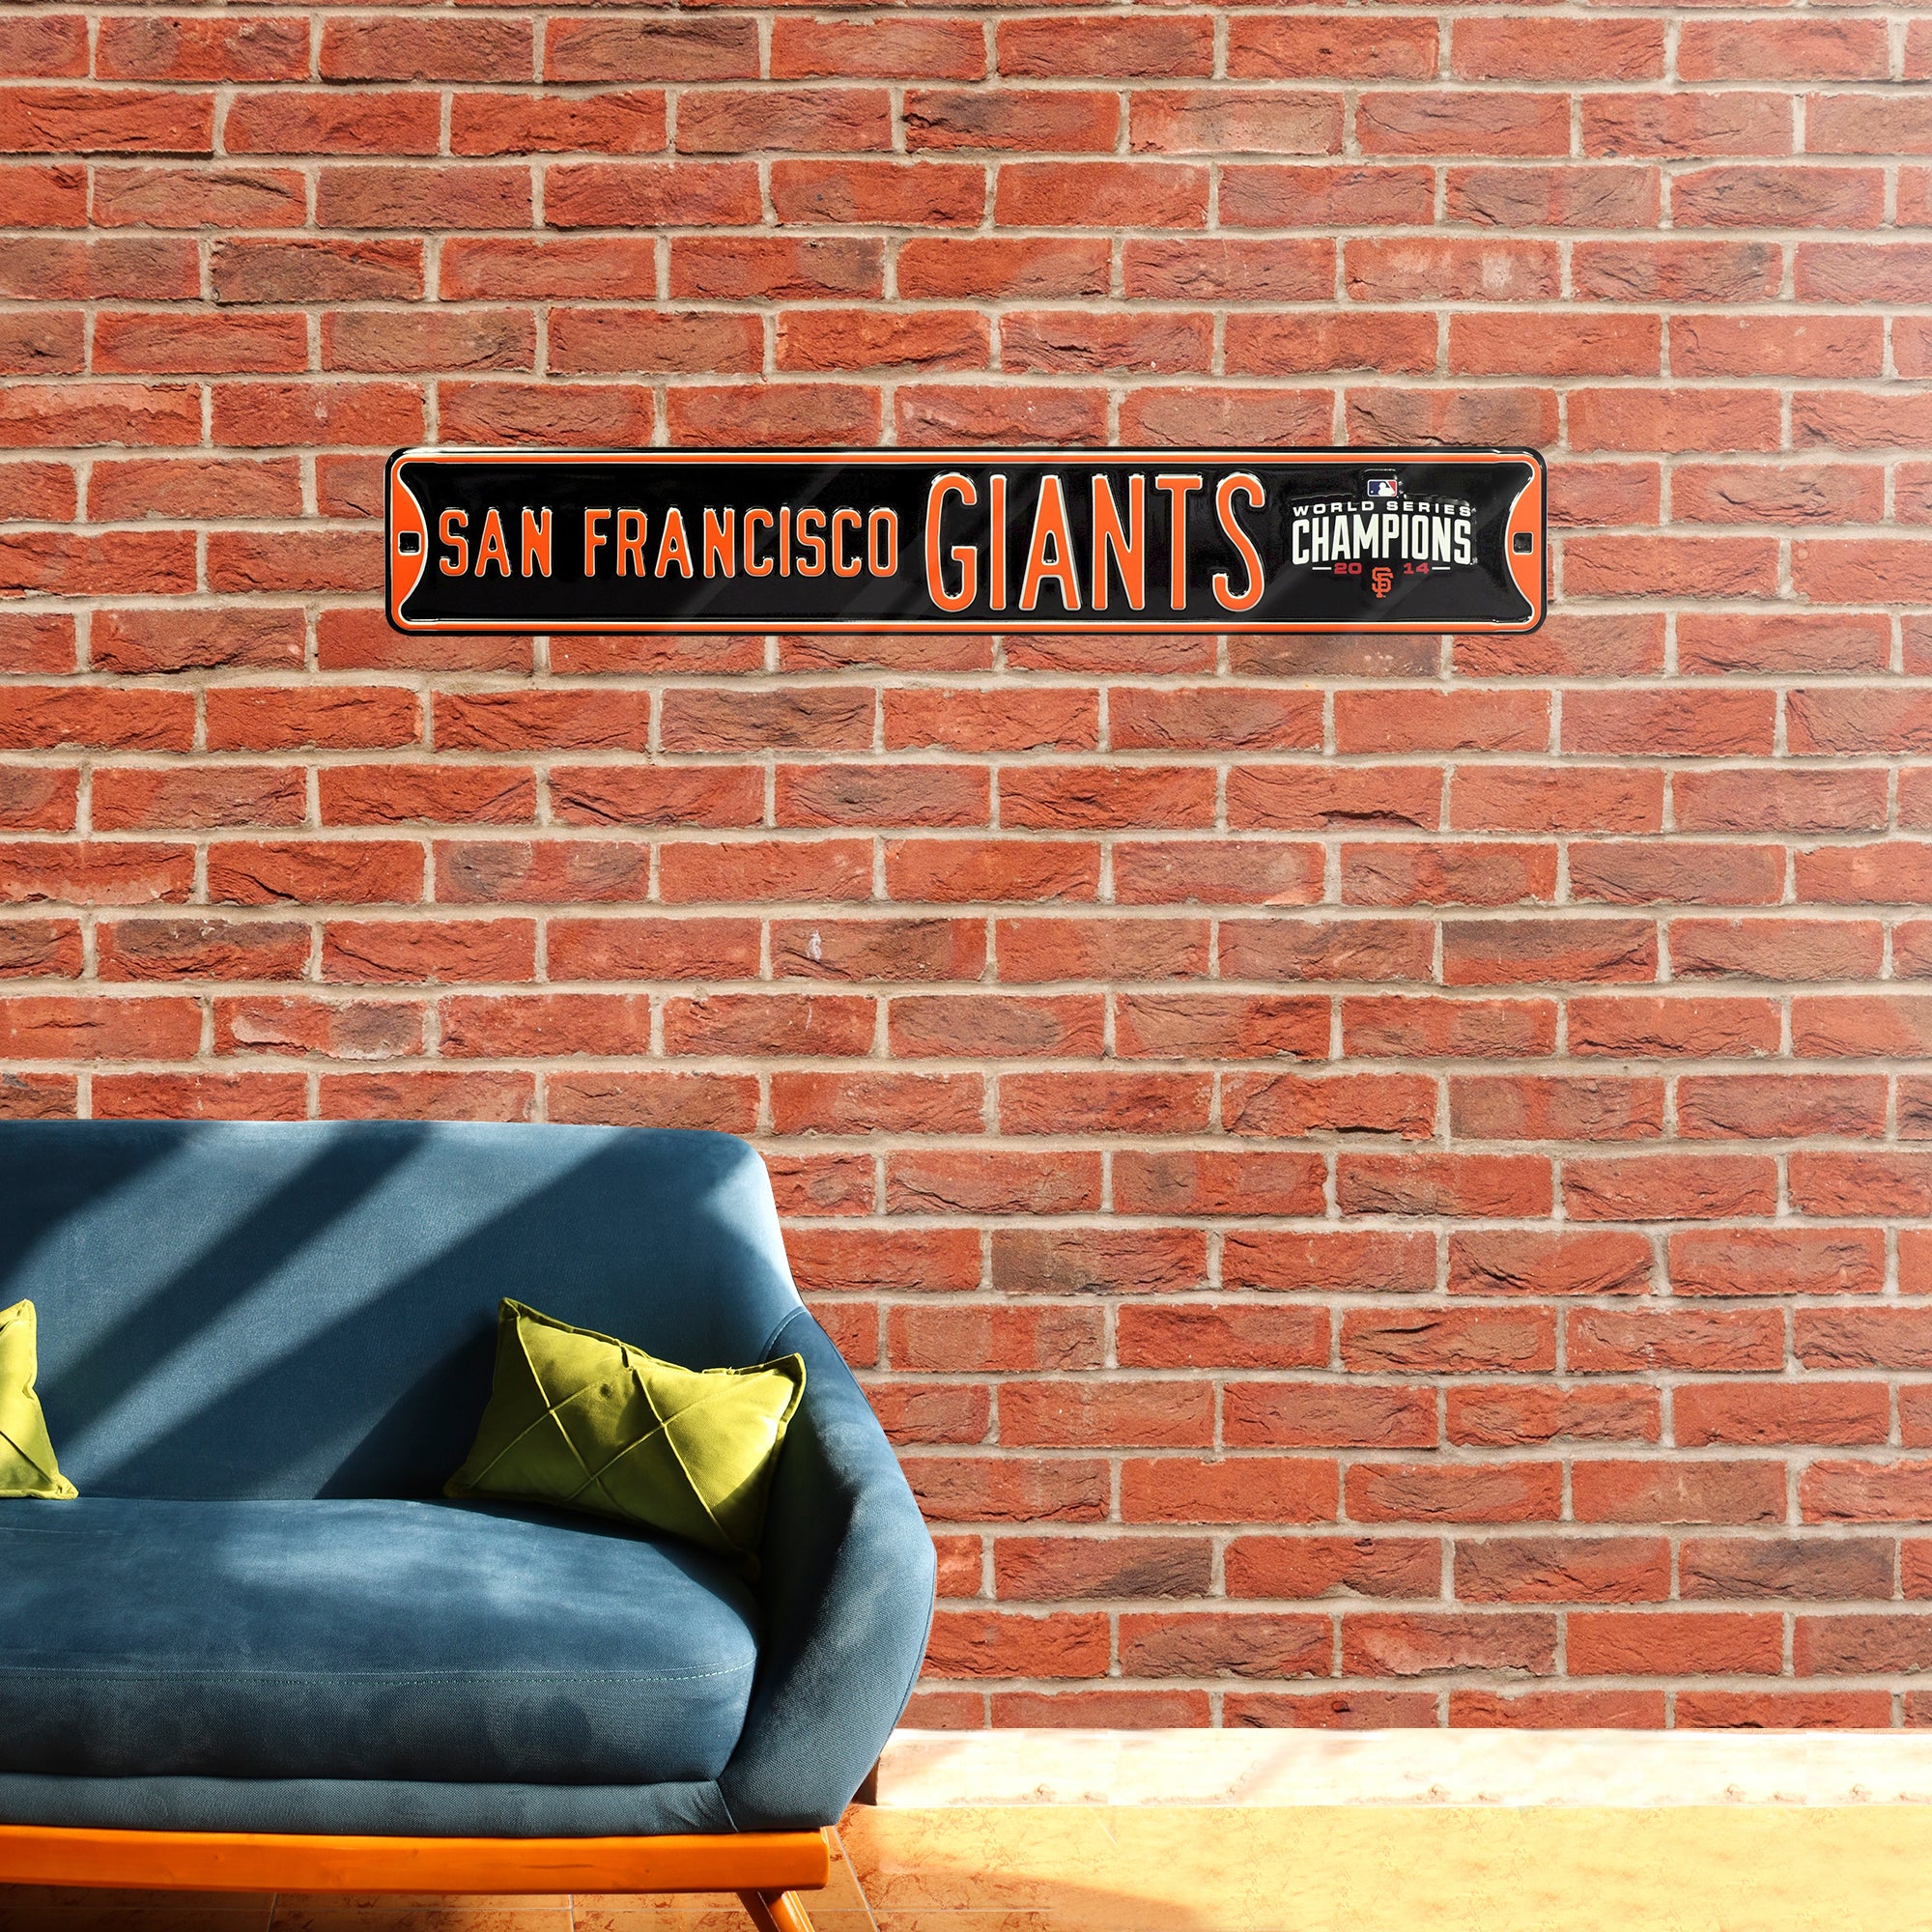 San Francisco Giants Steel Street Sign with Logo-WS 2014 Champions 36" W x 6" H by Fathead